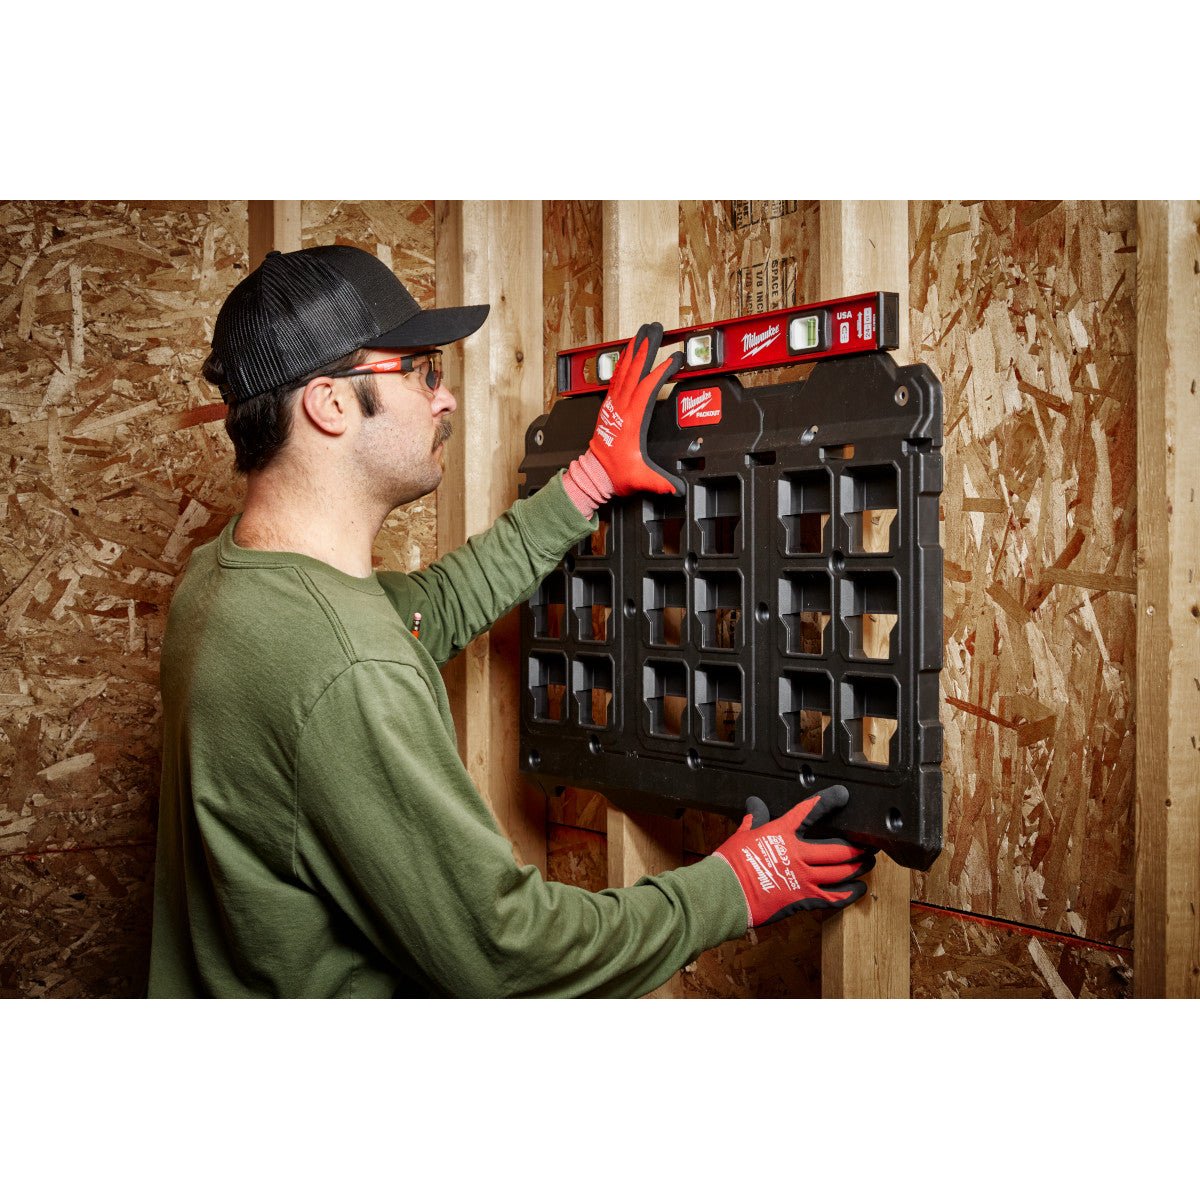 MILWAUKEE 48-22-8487 -  PACKOUT™ Large Wall Plate